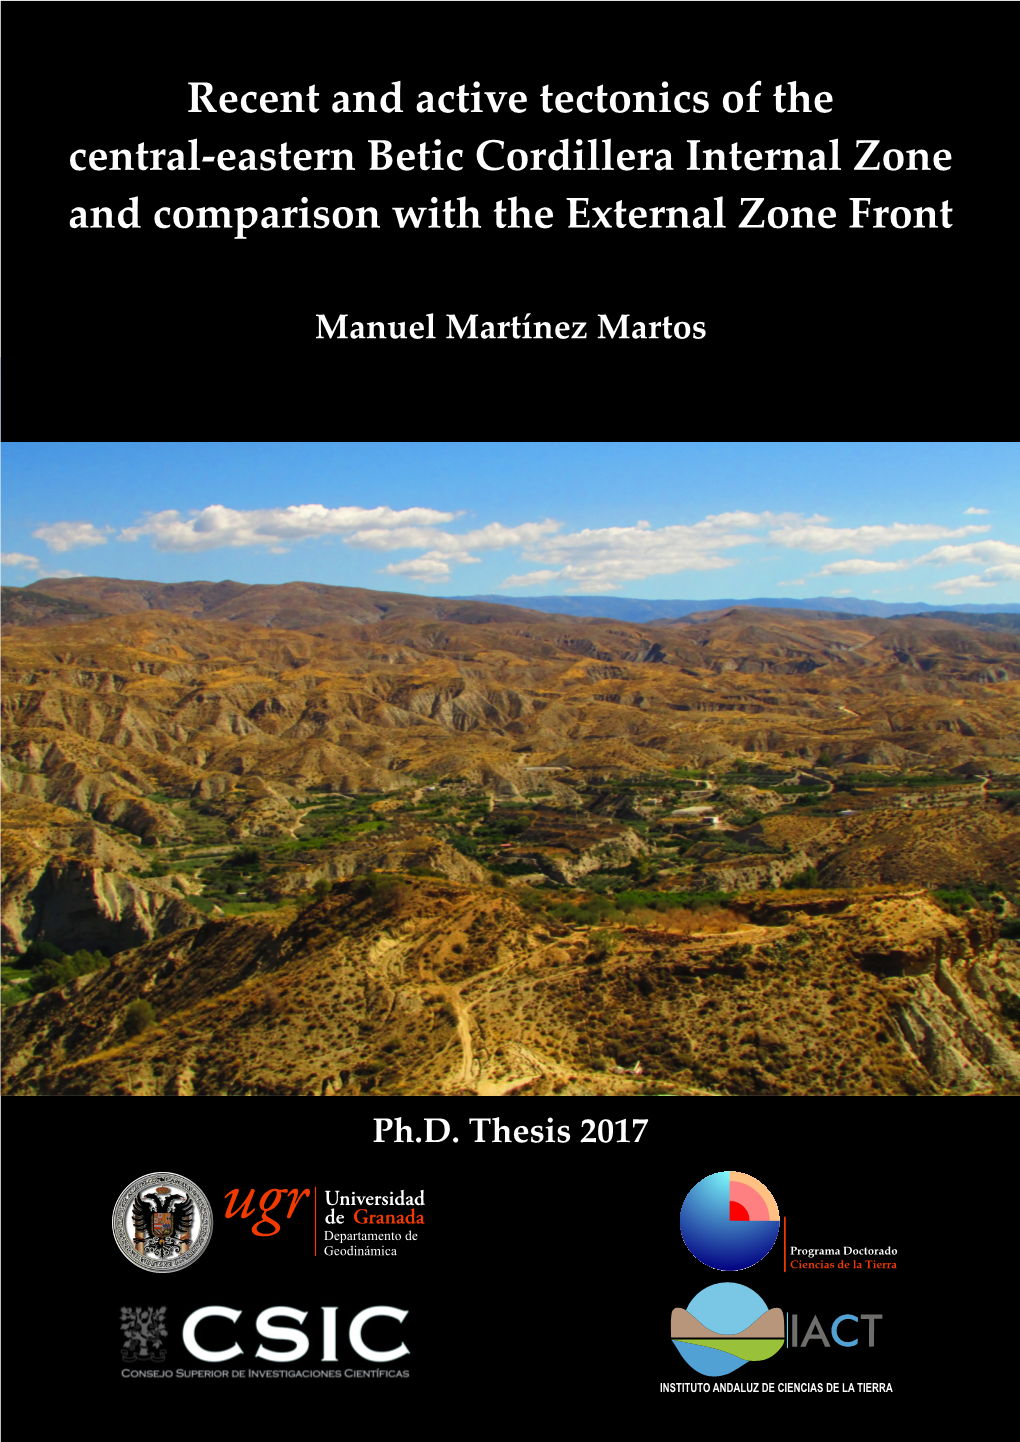 Recent and Active Tectonics of the Central-Eastern Betic Cordillera Internal Zone and Comparison with the External Zone Front